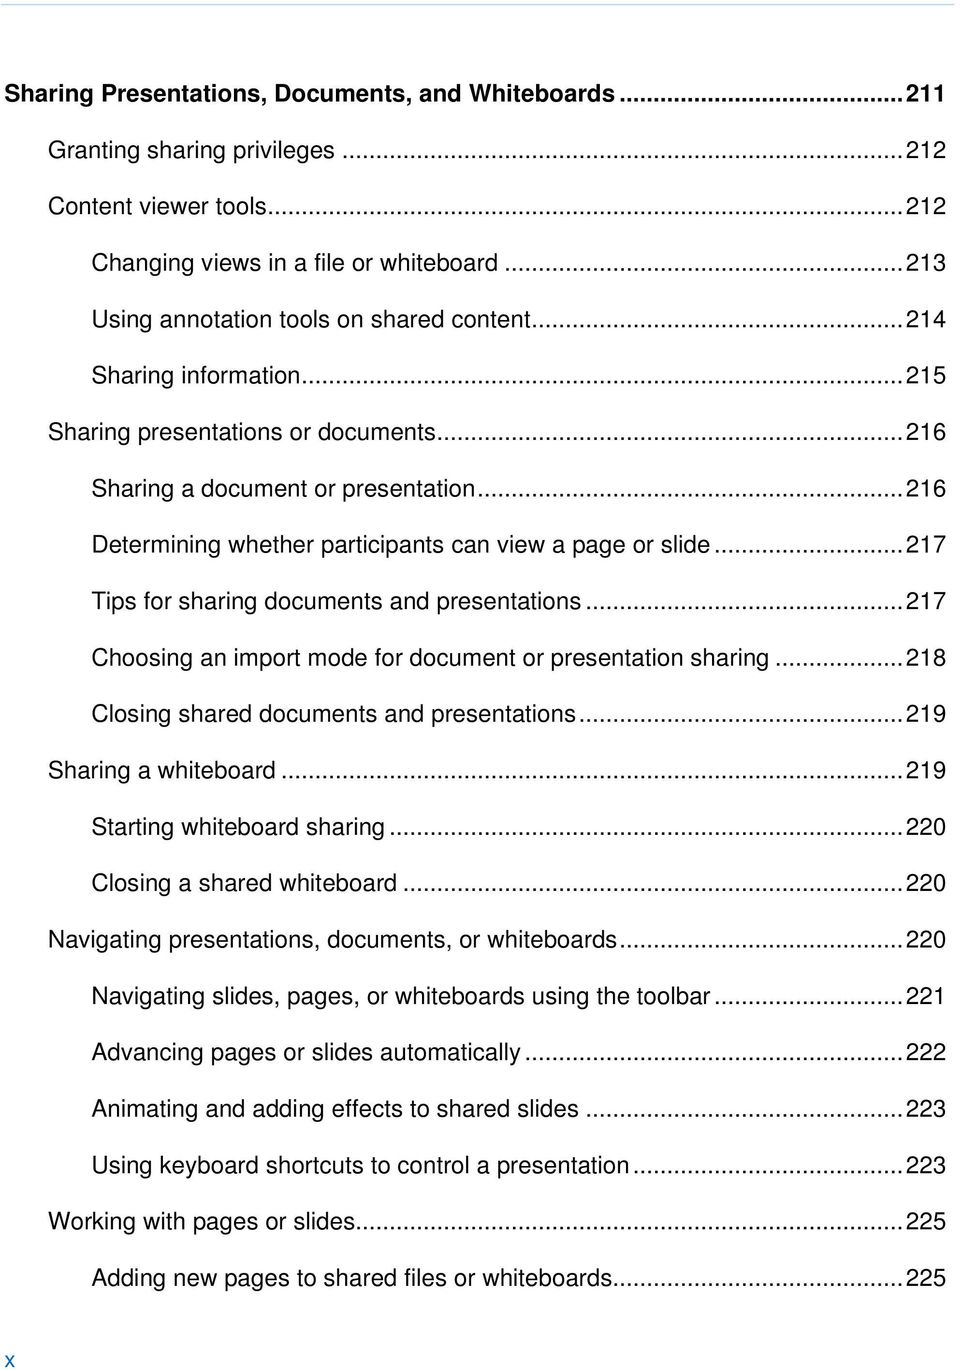 ..216 Determining whether participants can view a page or slide...217 Tips for sharing documents and presentations...217 Choosing an import mode for document or presentation sharing.